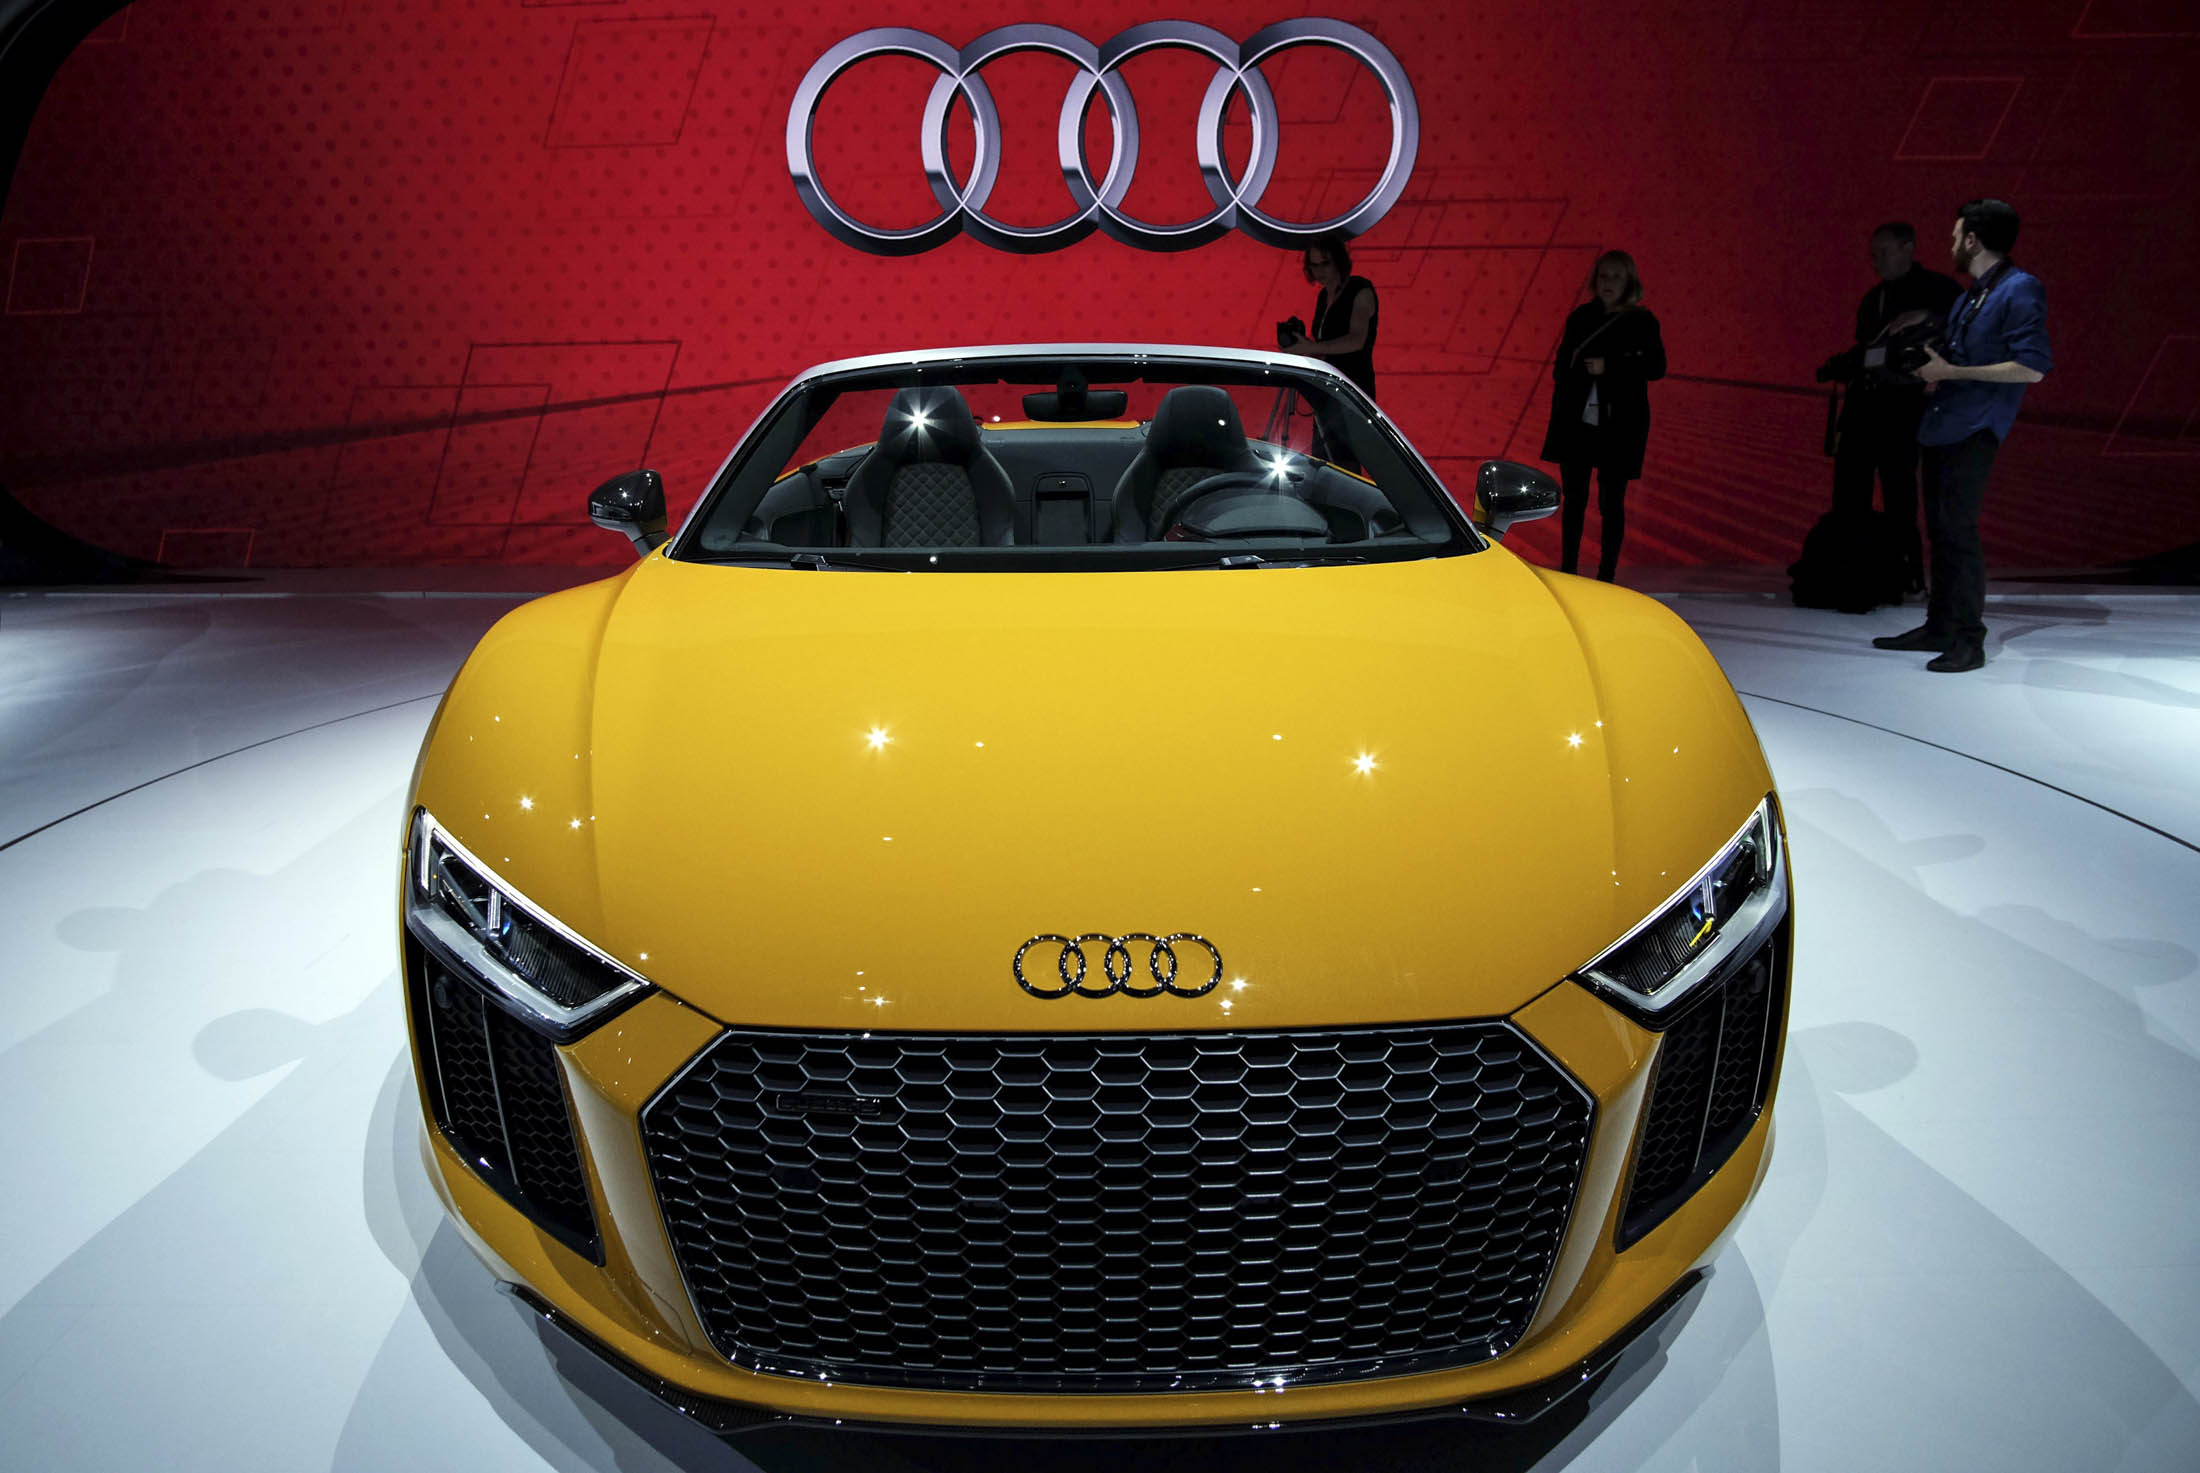 The Audi R8 Spyder is pictured during the New York International Auto Show on March 23, 2016. / AFP / Jewel SAMAD        (Photo credit should read JEWEL SAMAD/AFP/Getty Images)